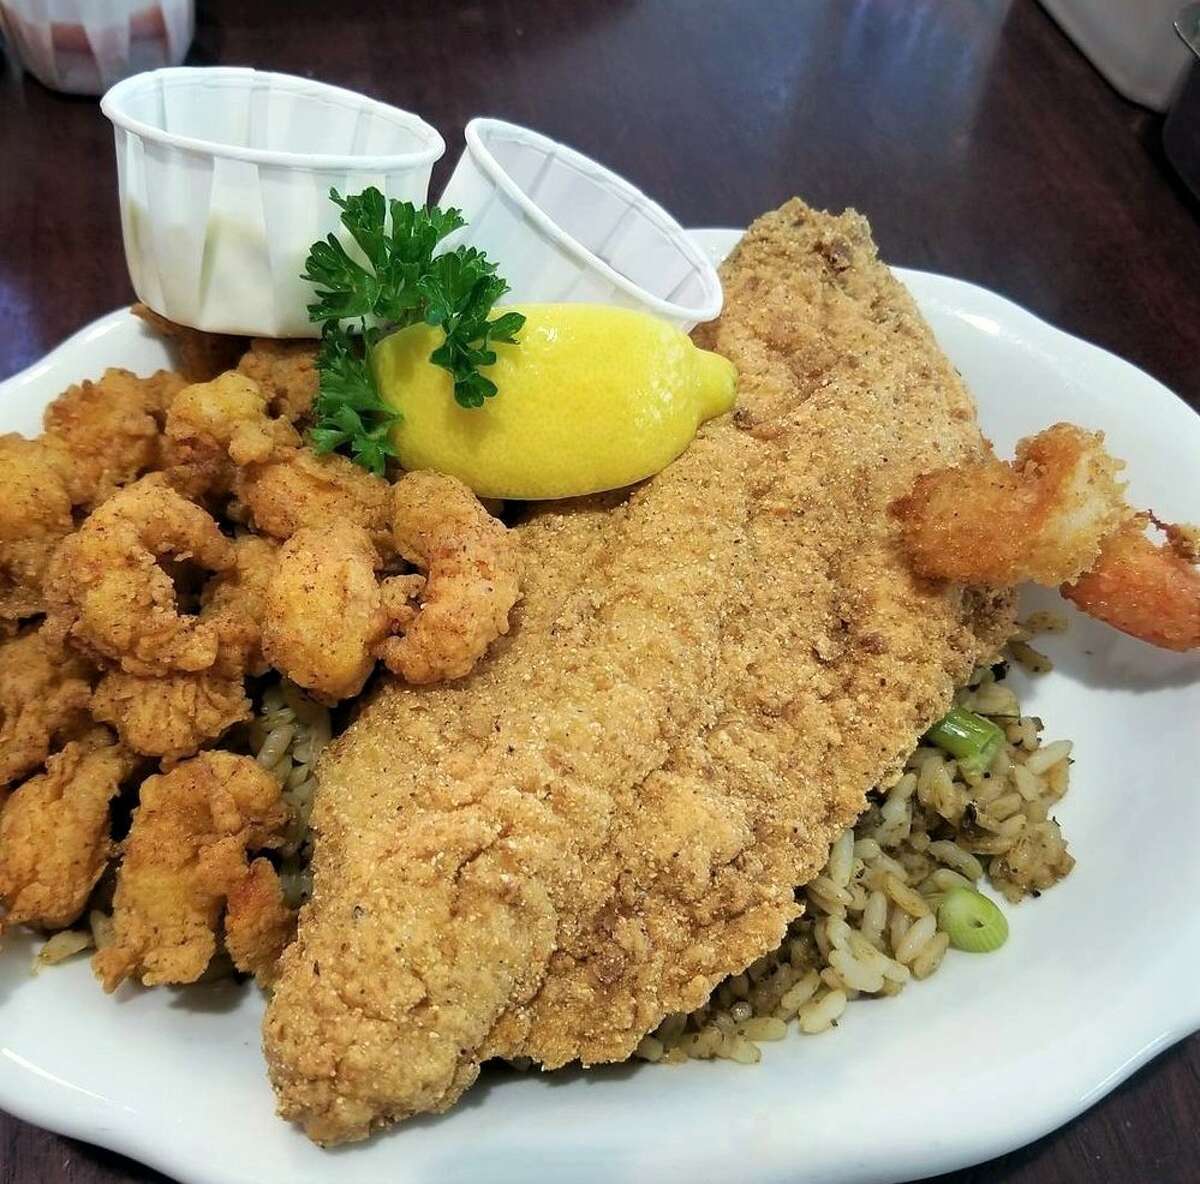 Pappadeaux Seafood Kitchen Pappadeaux Seafood Kitchen is one of my favorite restaurants. I order the fried fish and shrimp or the seafood cobb salad, plus the vanilla cheesecake. (Photo: Yelp/Romeo K).